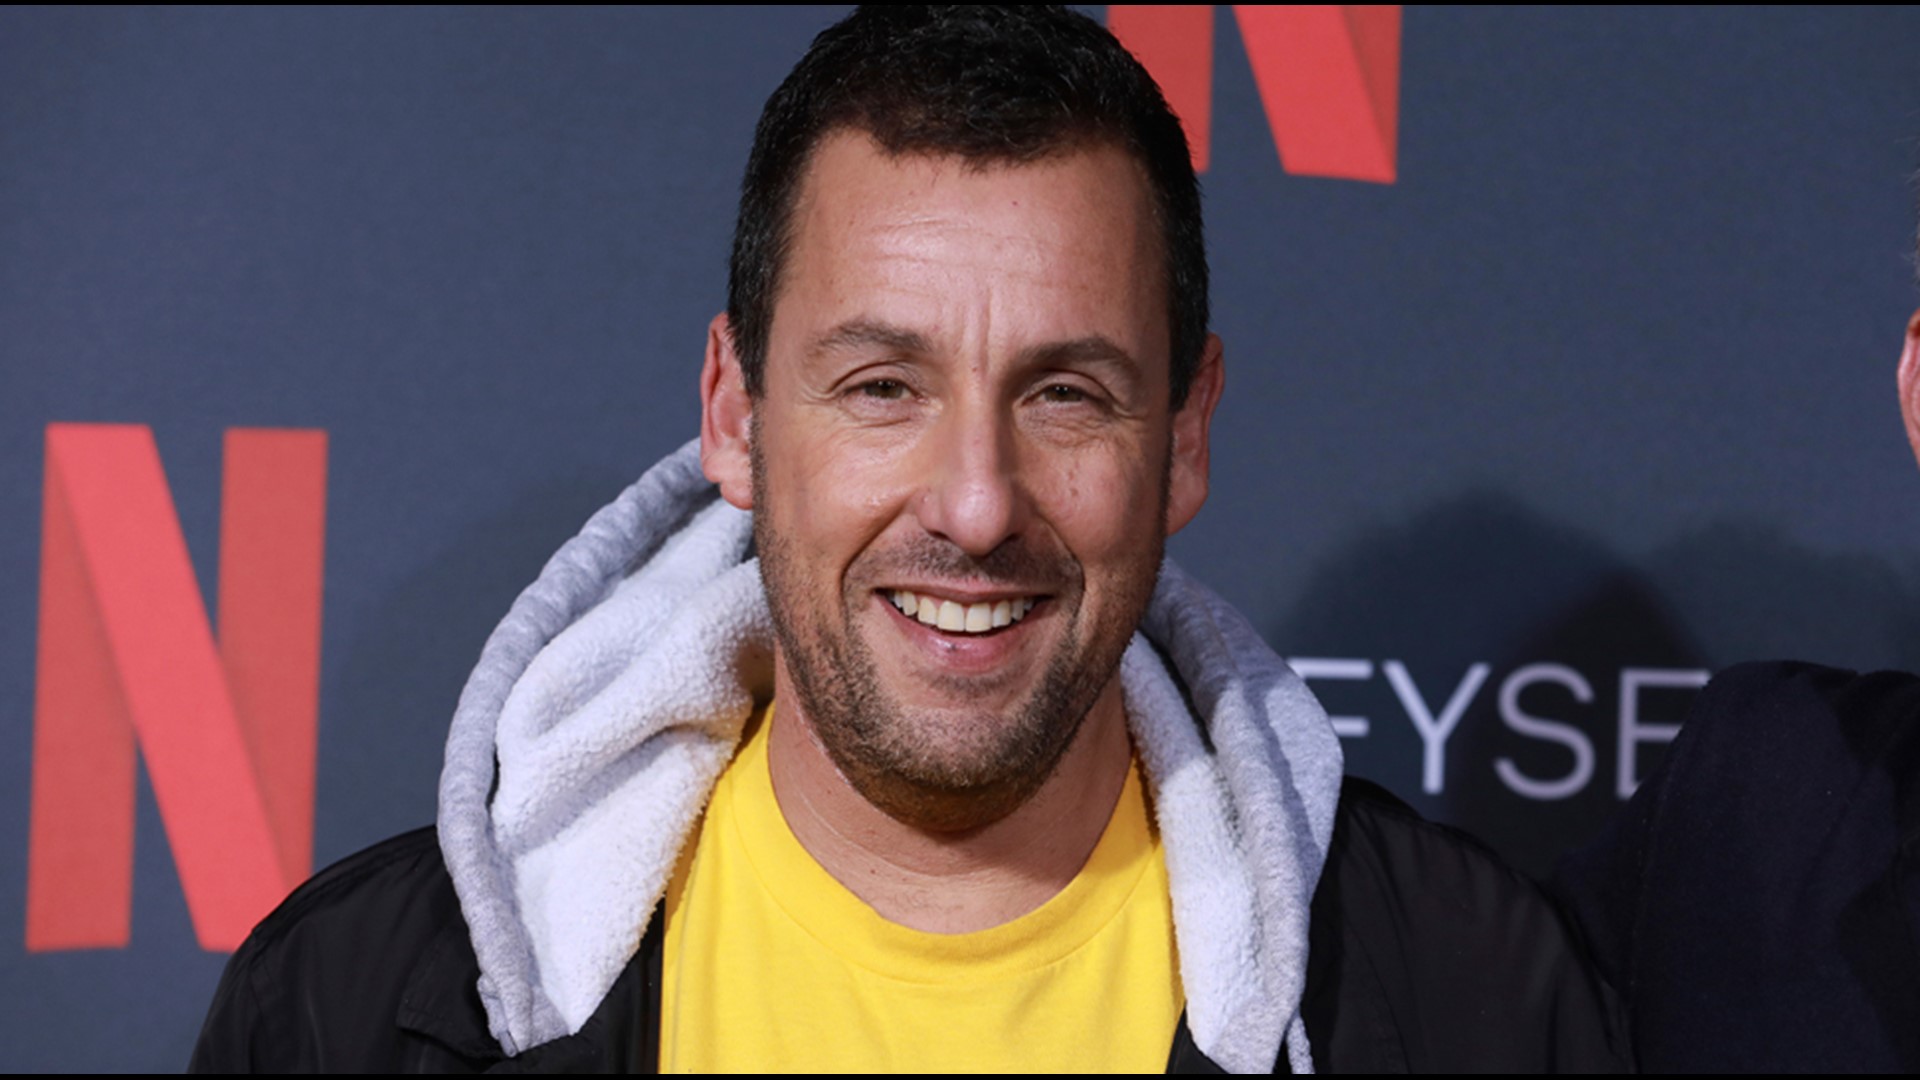 Adam Sandler responded to being turned away from an IHOP last month.